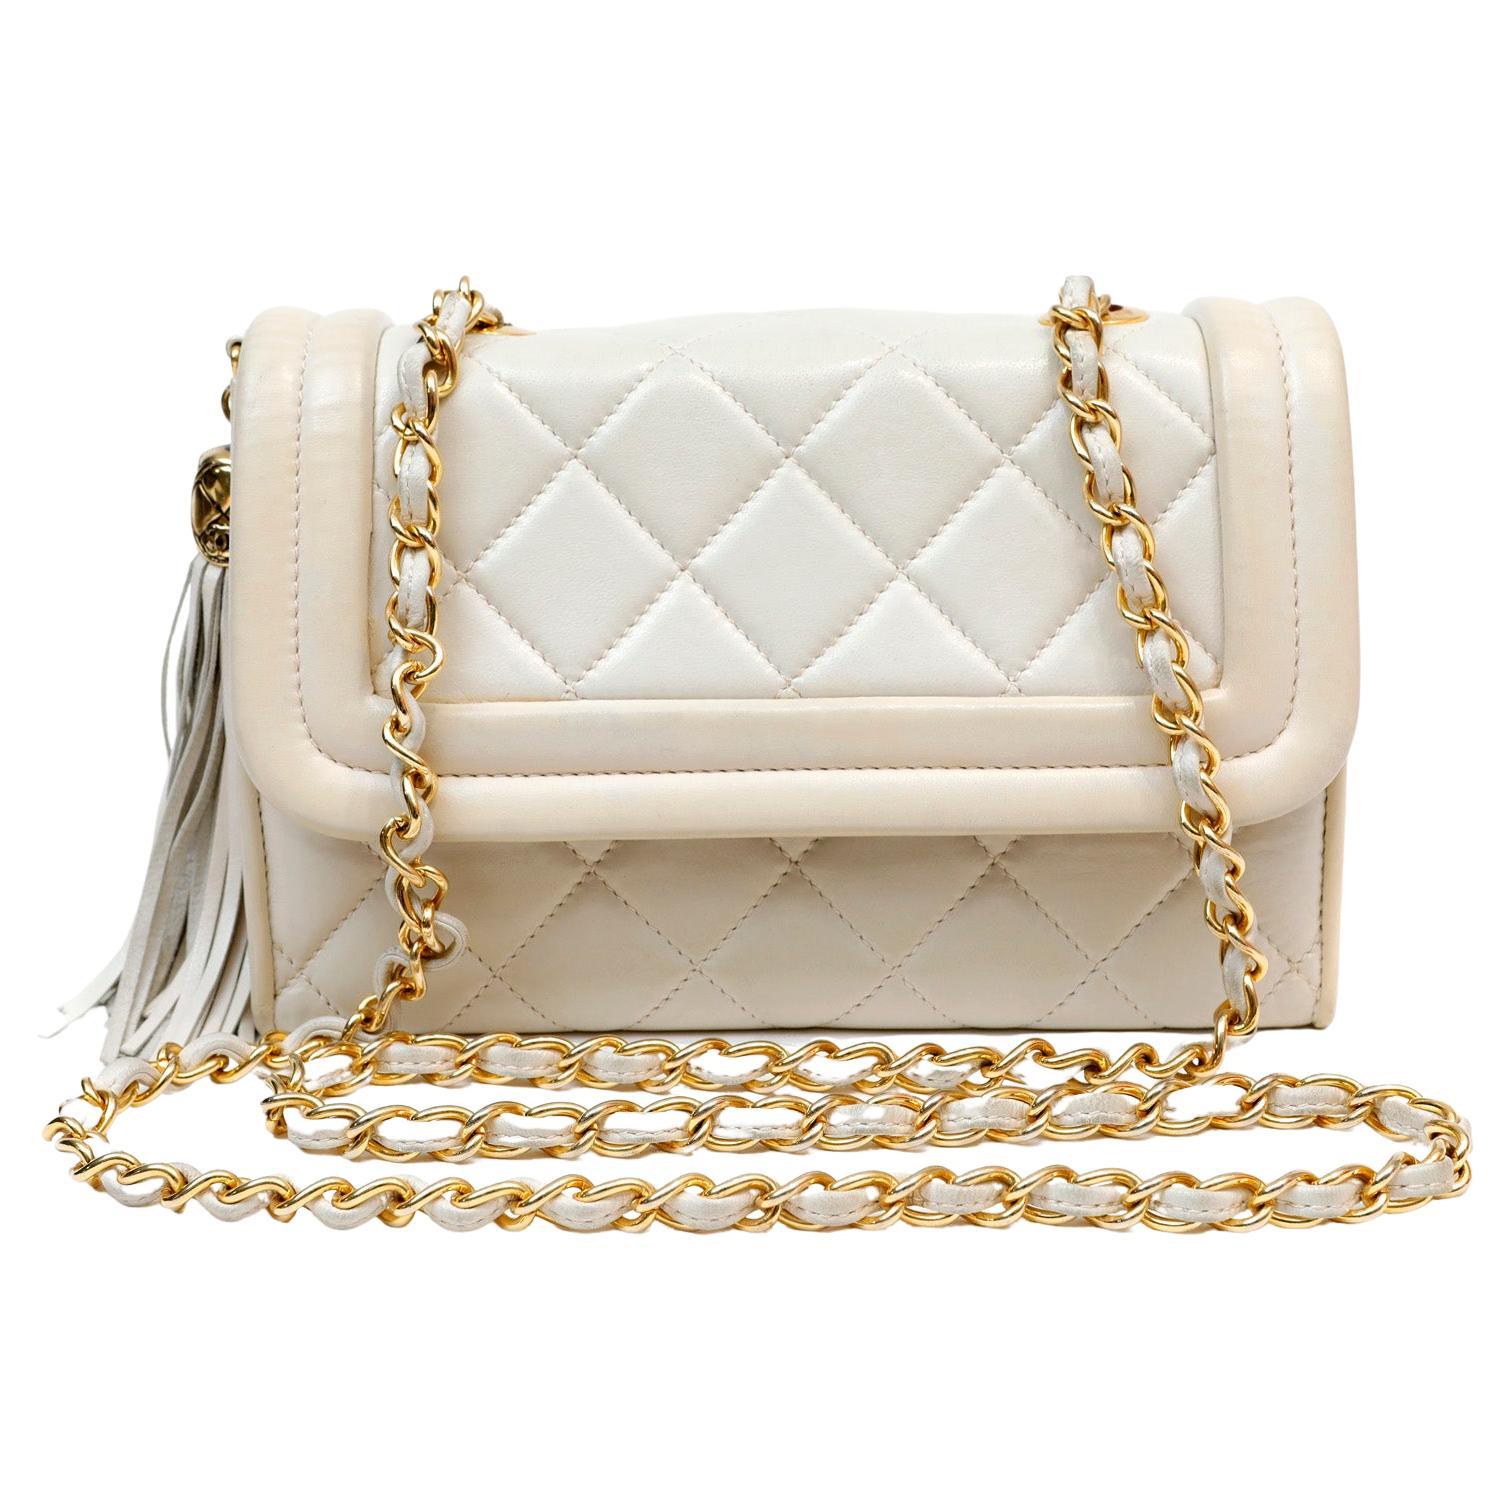 Chanel Ivory Quilted Lambskin Vintage Flap Bag